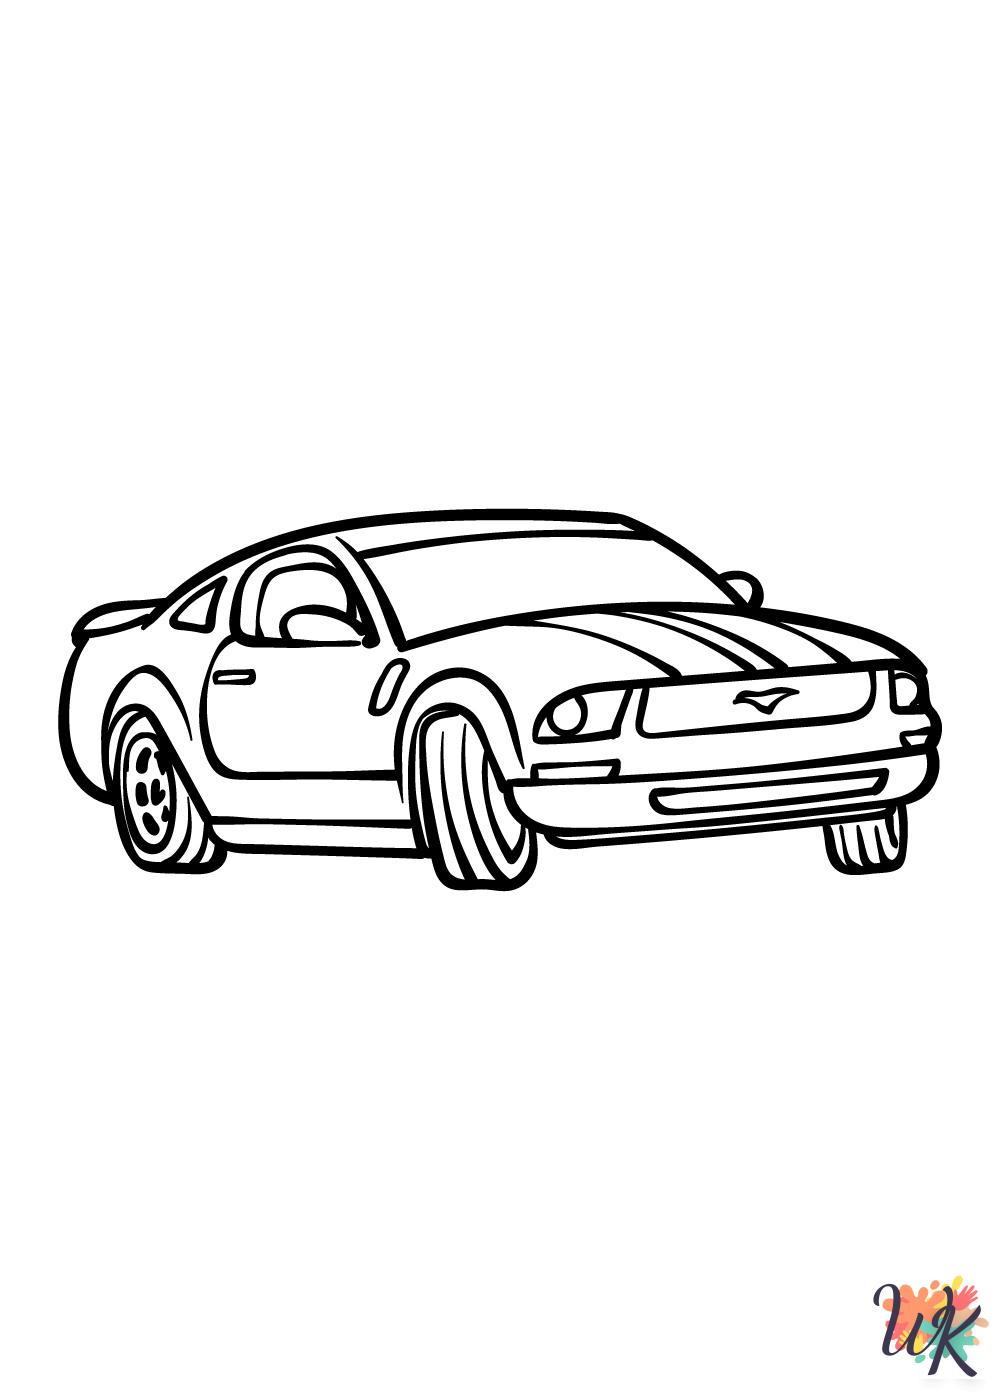 coloring pages printable Race Car